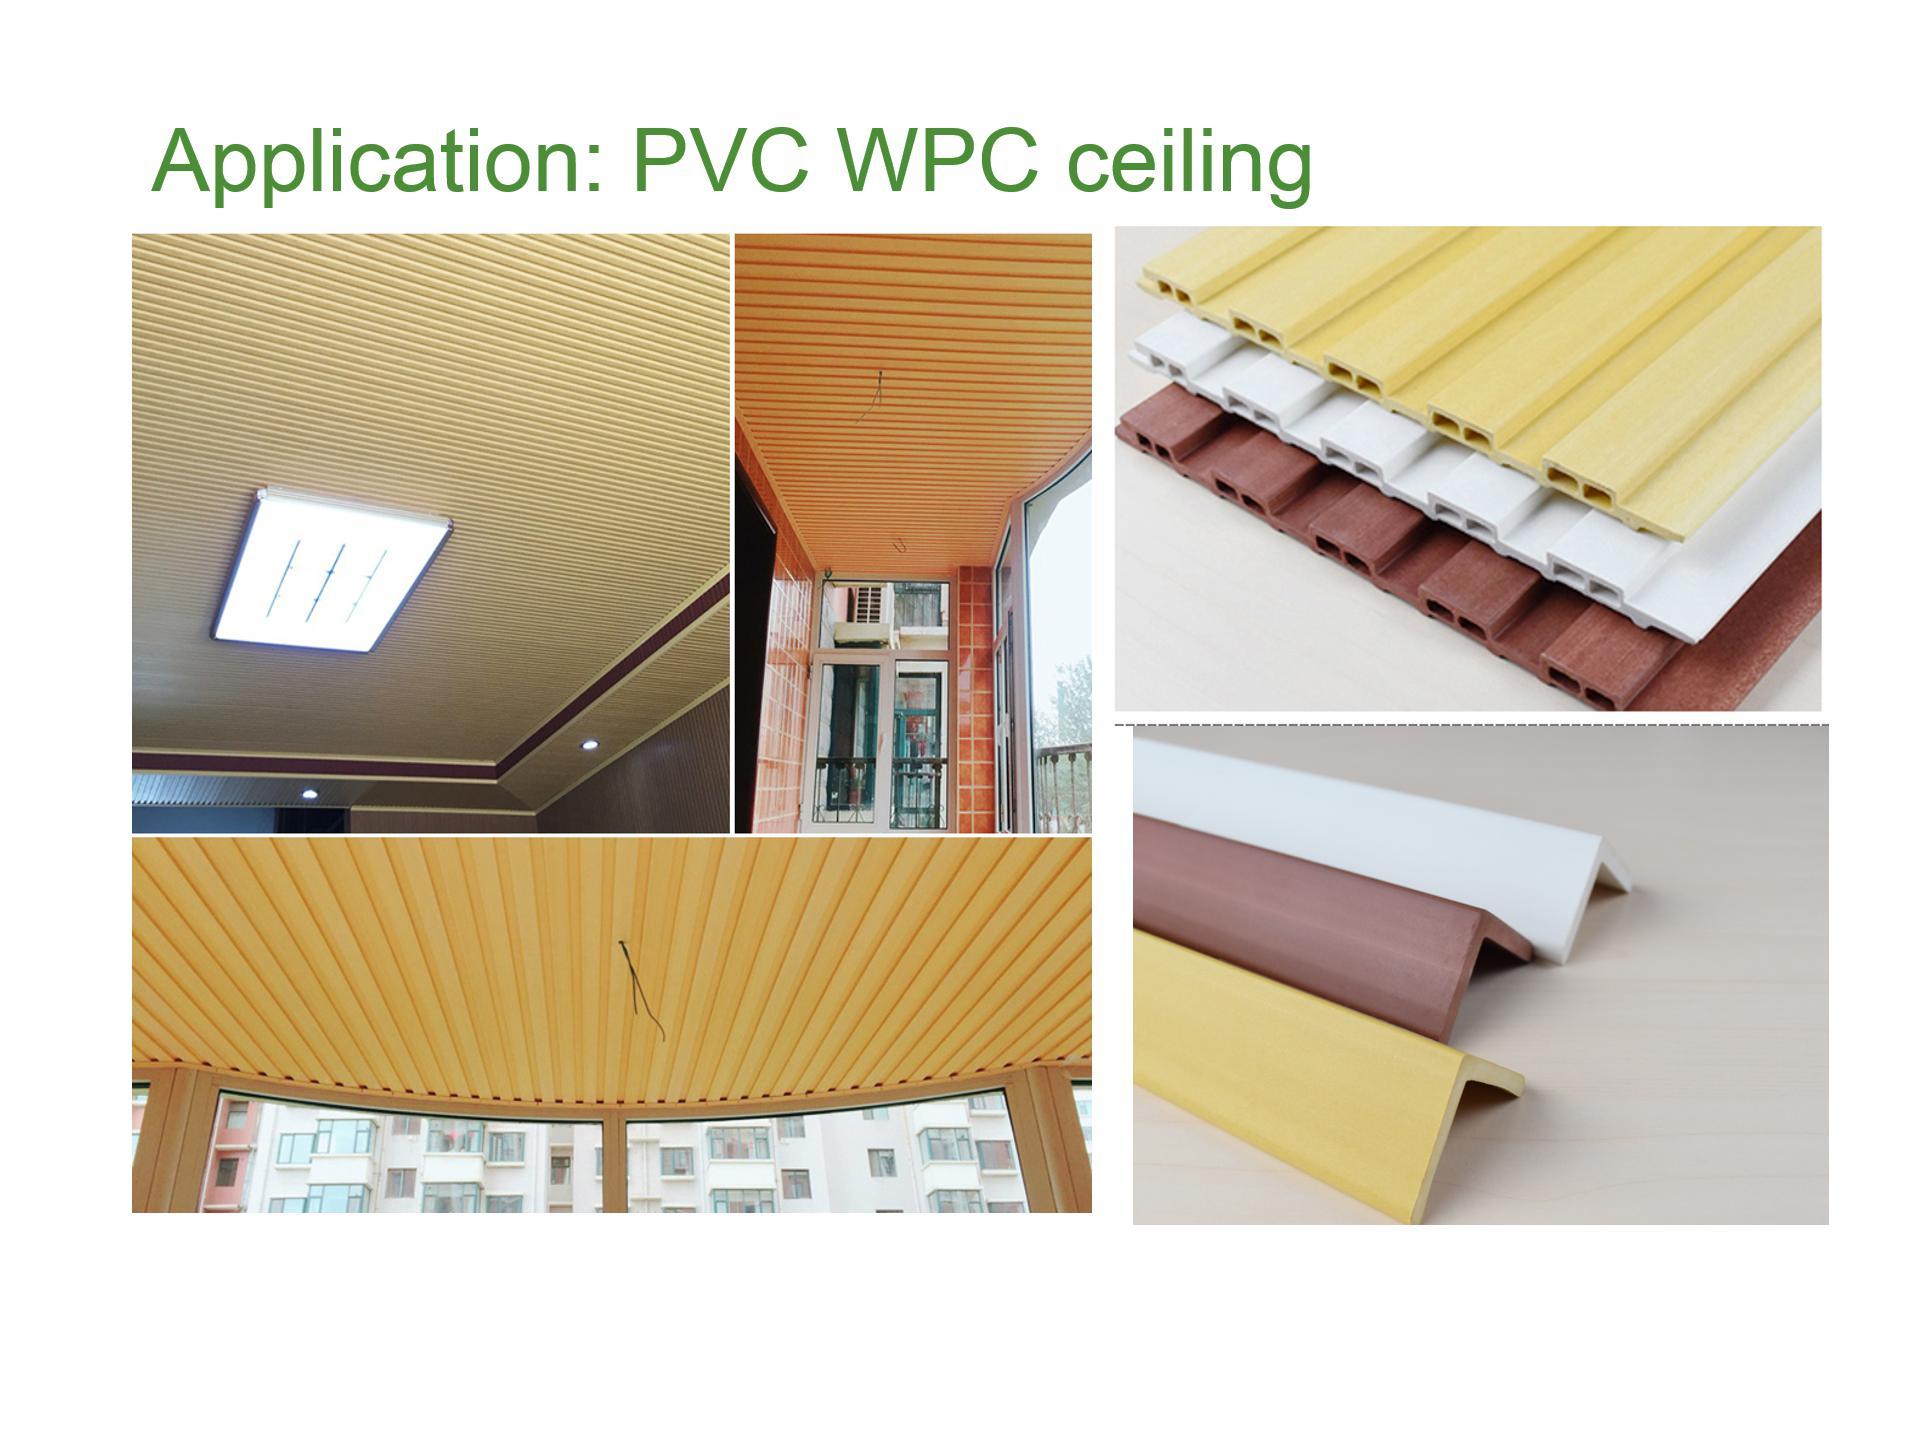 Laminated WPC wall panel installed